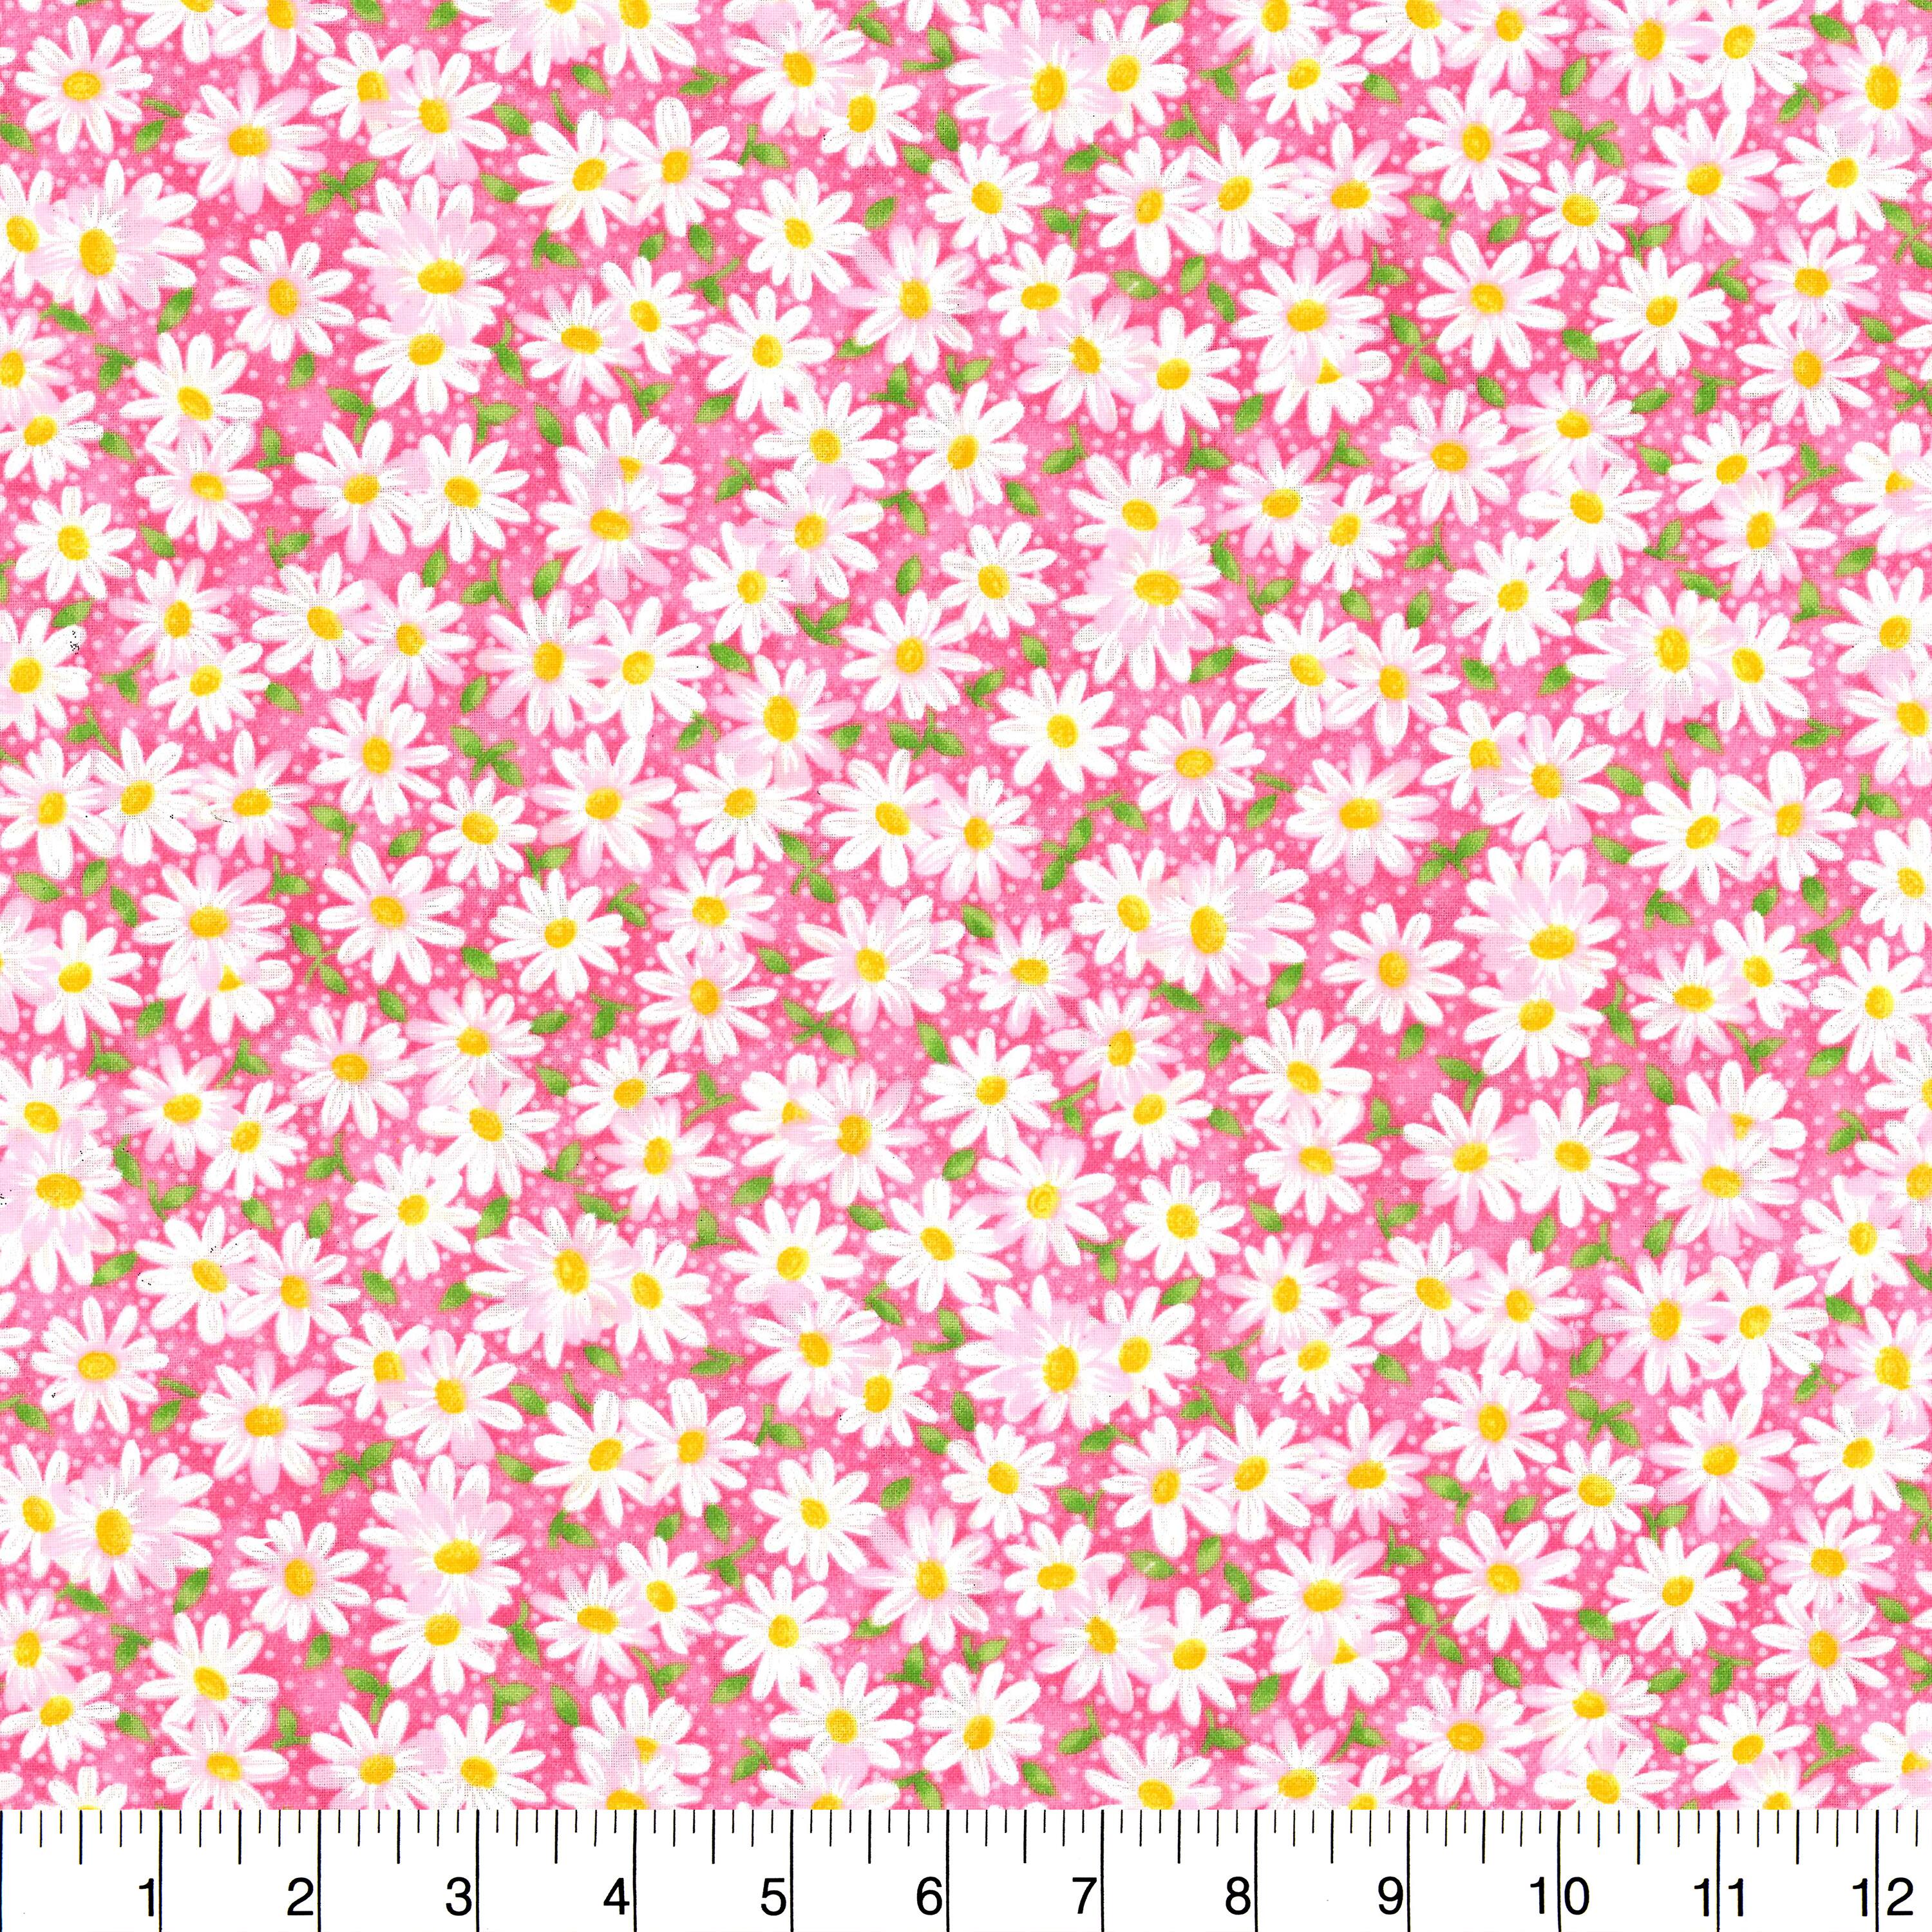 Pink Packed Daisies Cotton Fabric